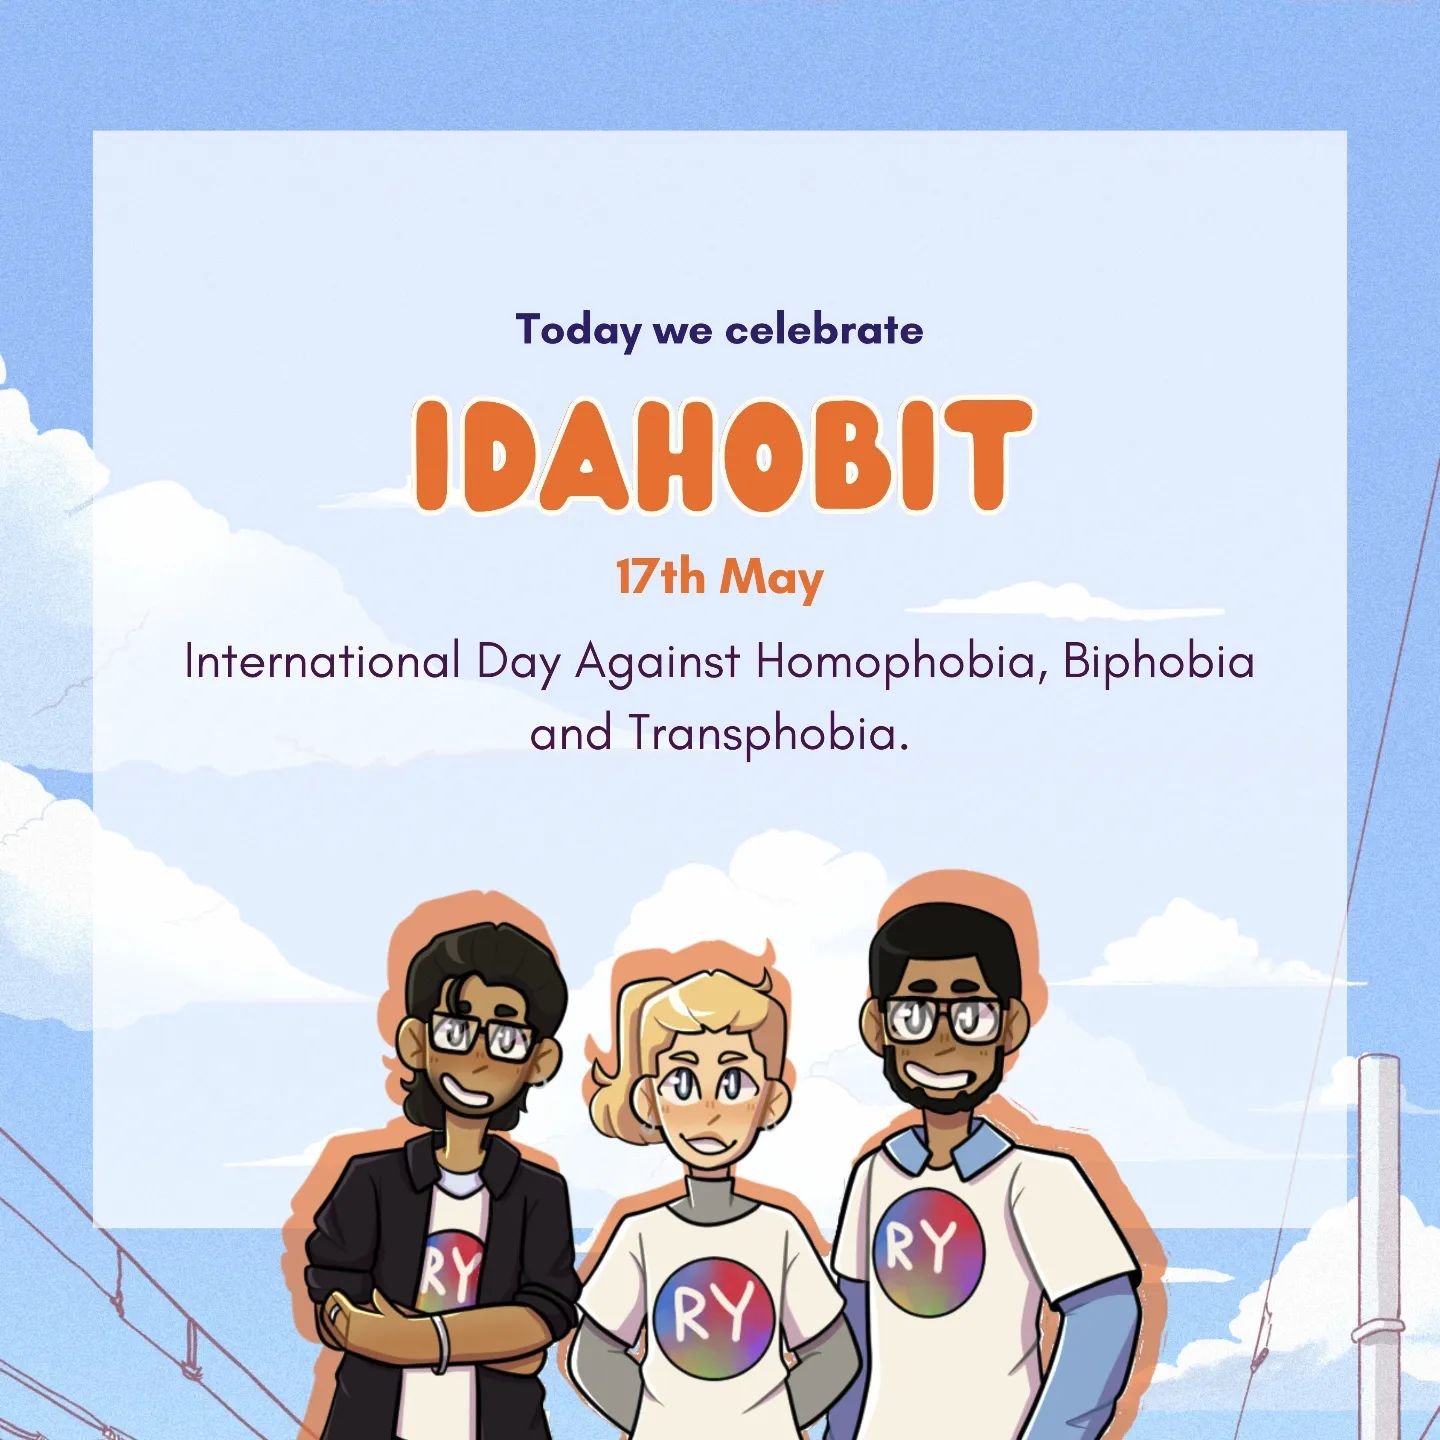 Hey friends! Today is a very special day. 

IDAHOBIT stands for the International Day Against Homophobia, Biphobia and Transphobia. IDAHOBIT started on December 17, 1990, when the World Health Organization (WHO) declassified homosexuality as a diseas